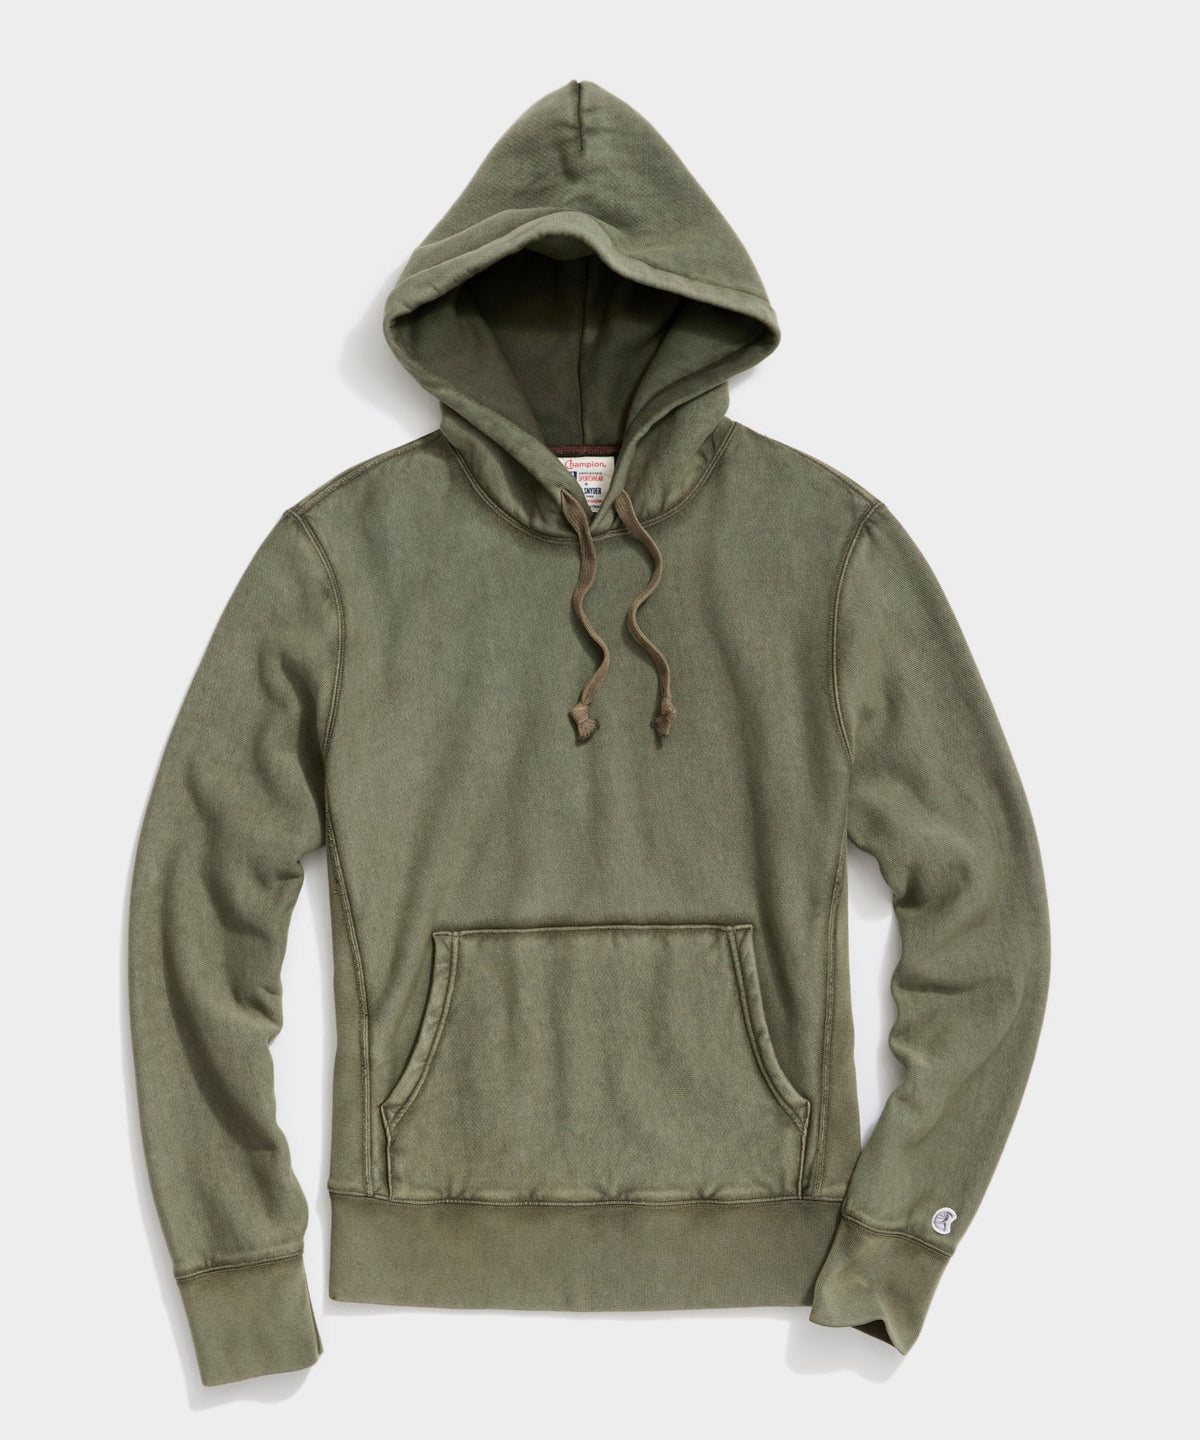 Sun-Faded Midweight Popover Hoodie Sweatshirt in Army Green